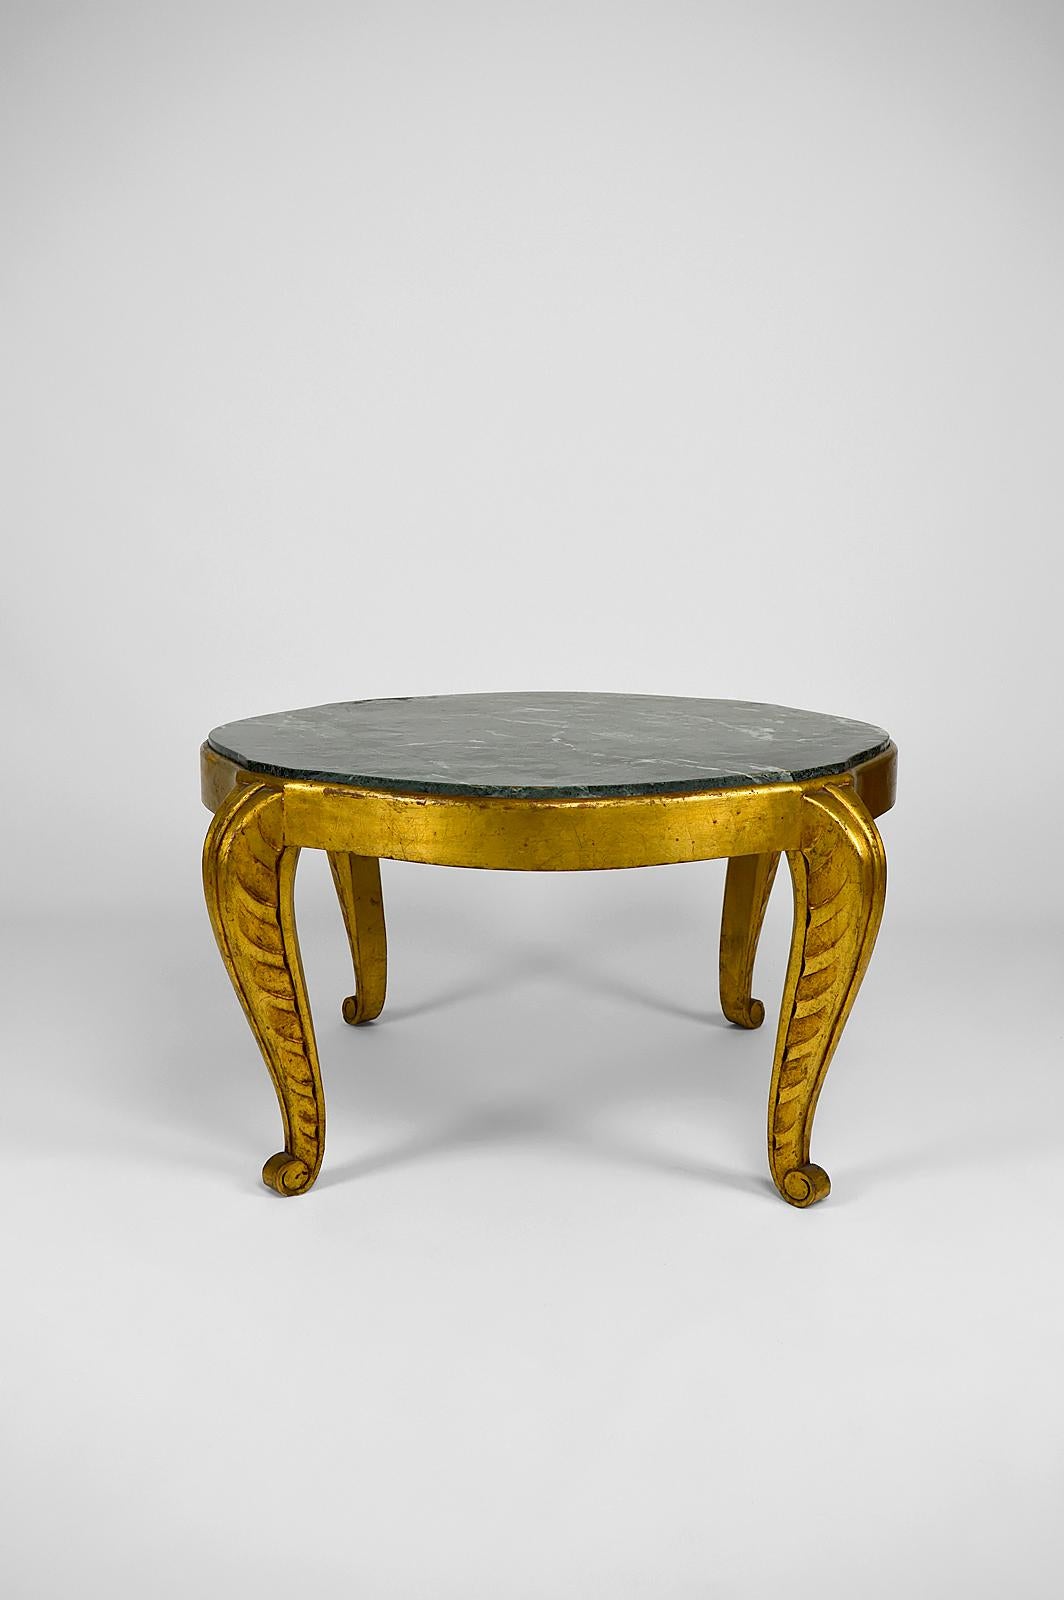 Mid-20th Century Gilded Side Table with Marble Top by Maison Jansen, Neoclassical Art Deco, 1940s For Sale